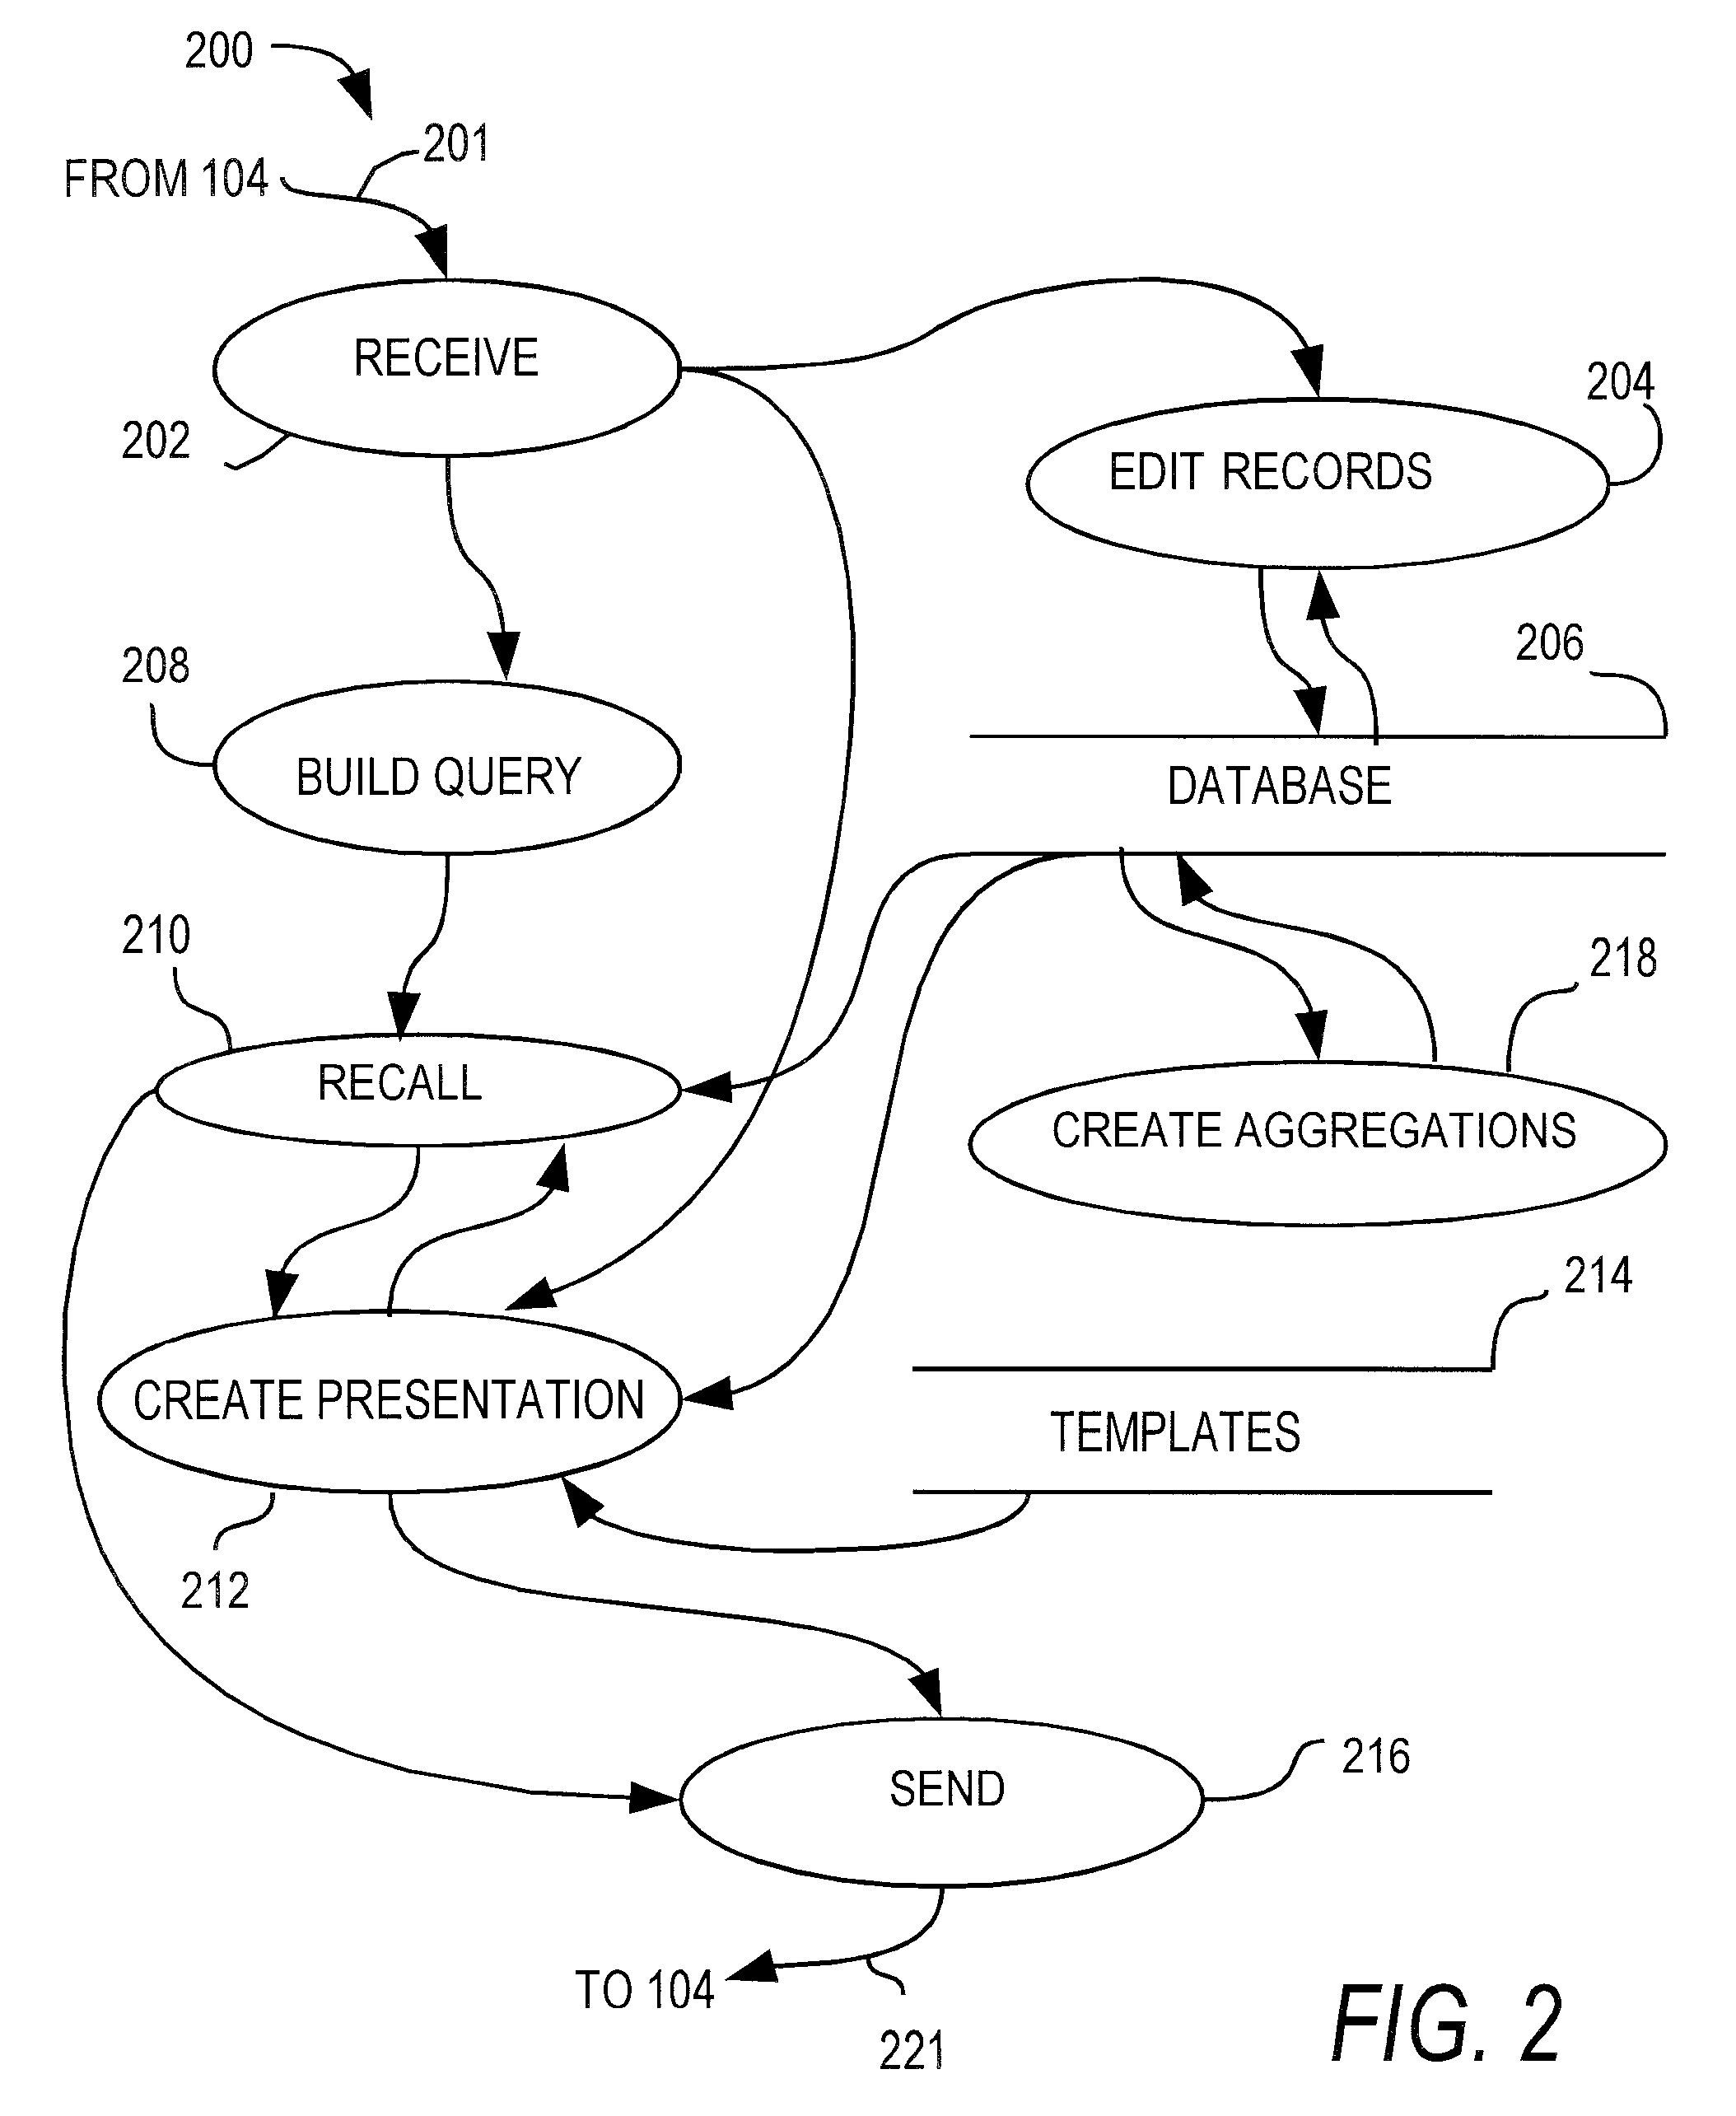 Systems and methods for managing affiliations